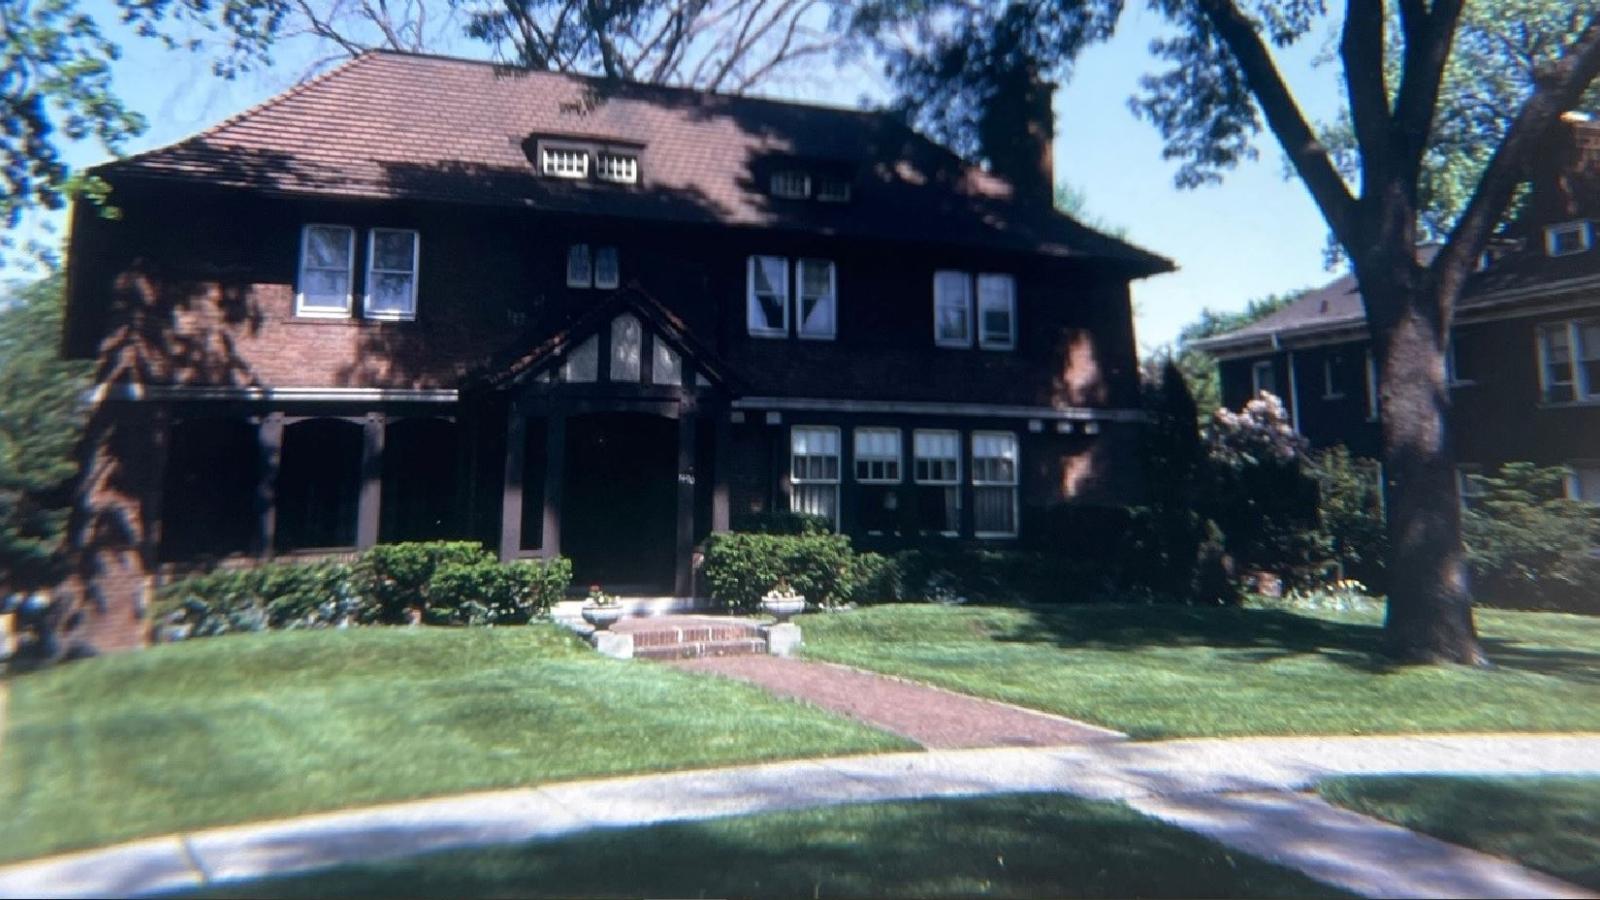 1490 Iroquois - May 1972